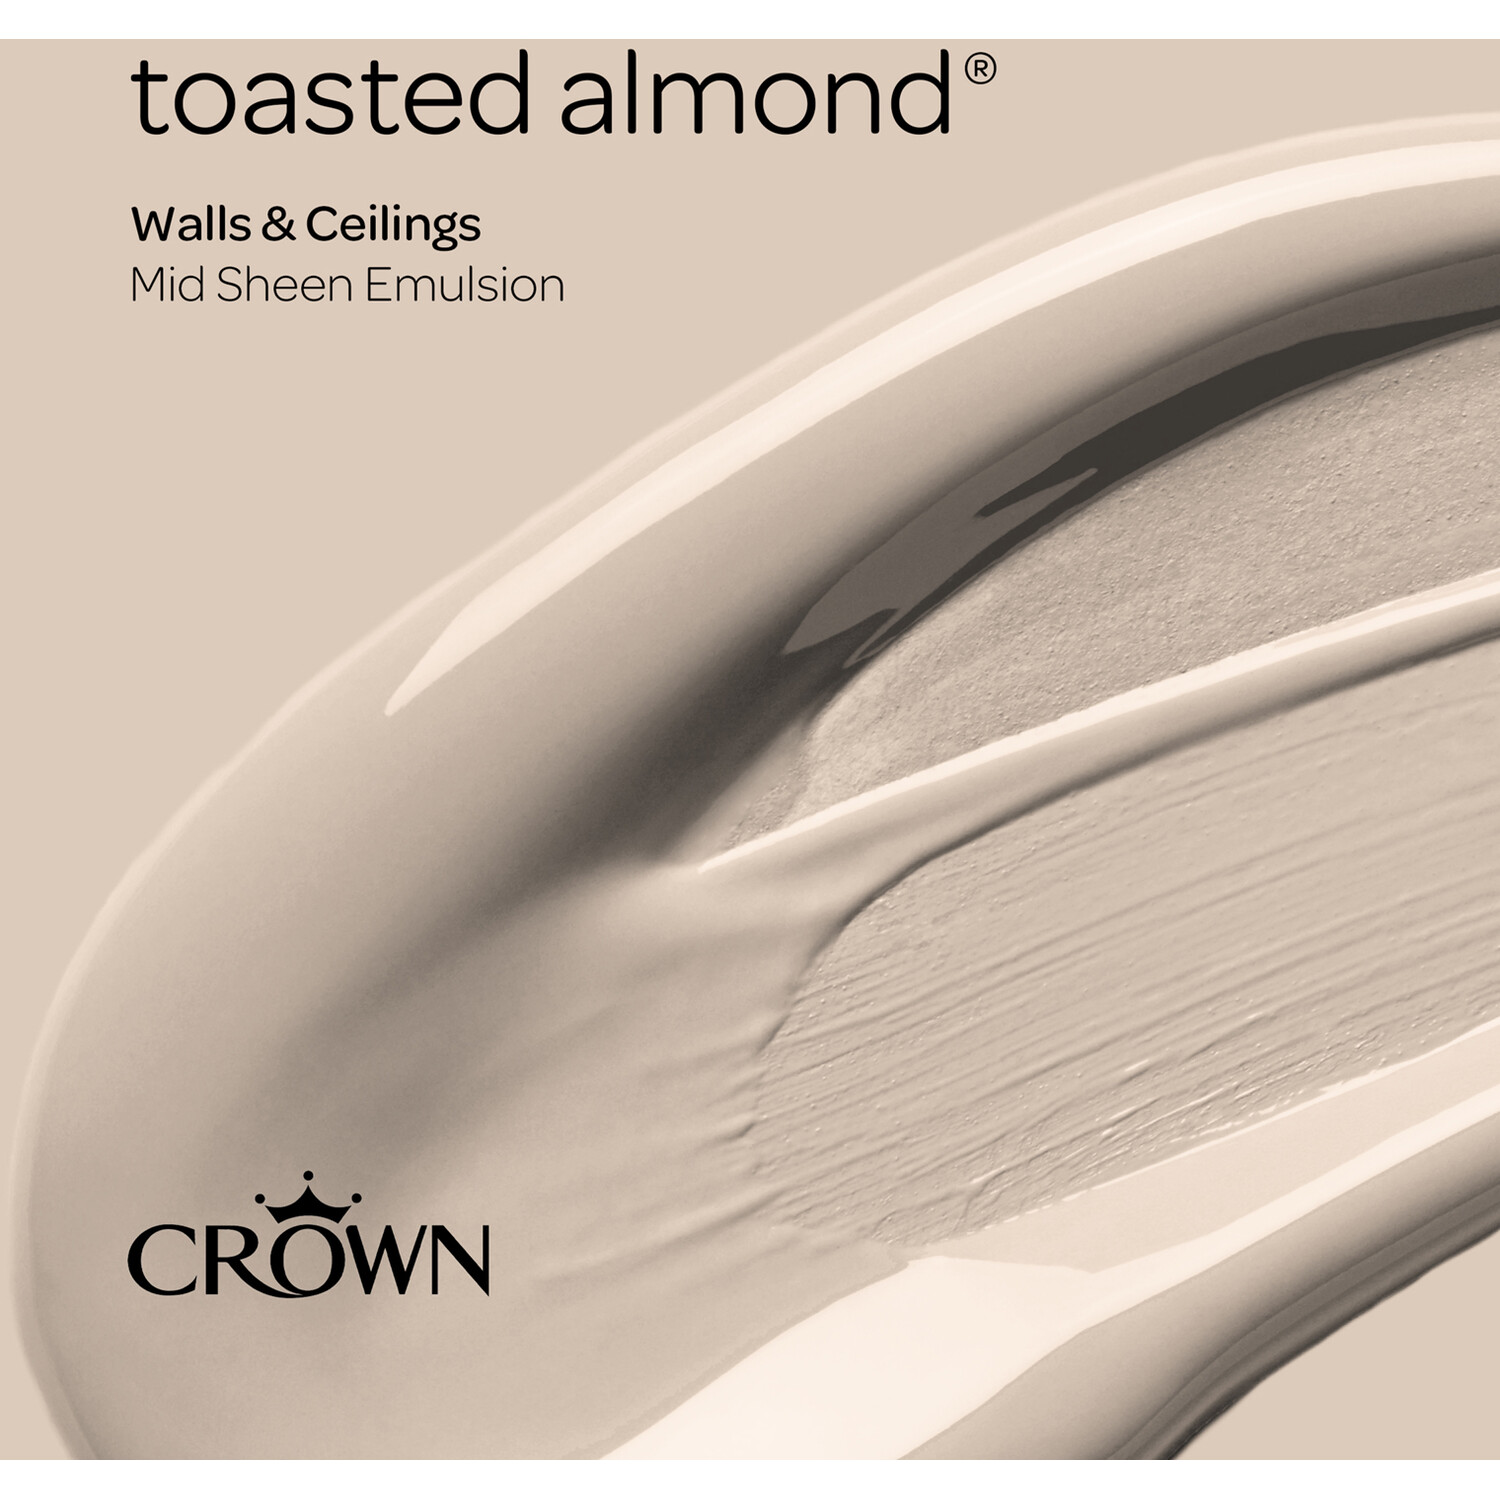 Crown Walls & Ceilings Toasted Almond Mid Sheen Emulsion Paint 2.5L Image 4